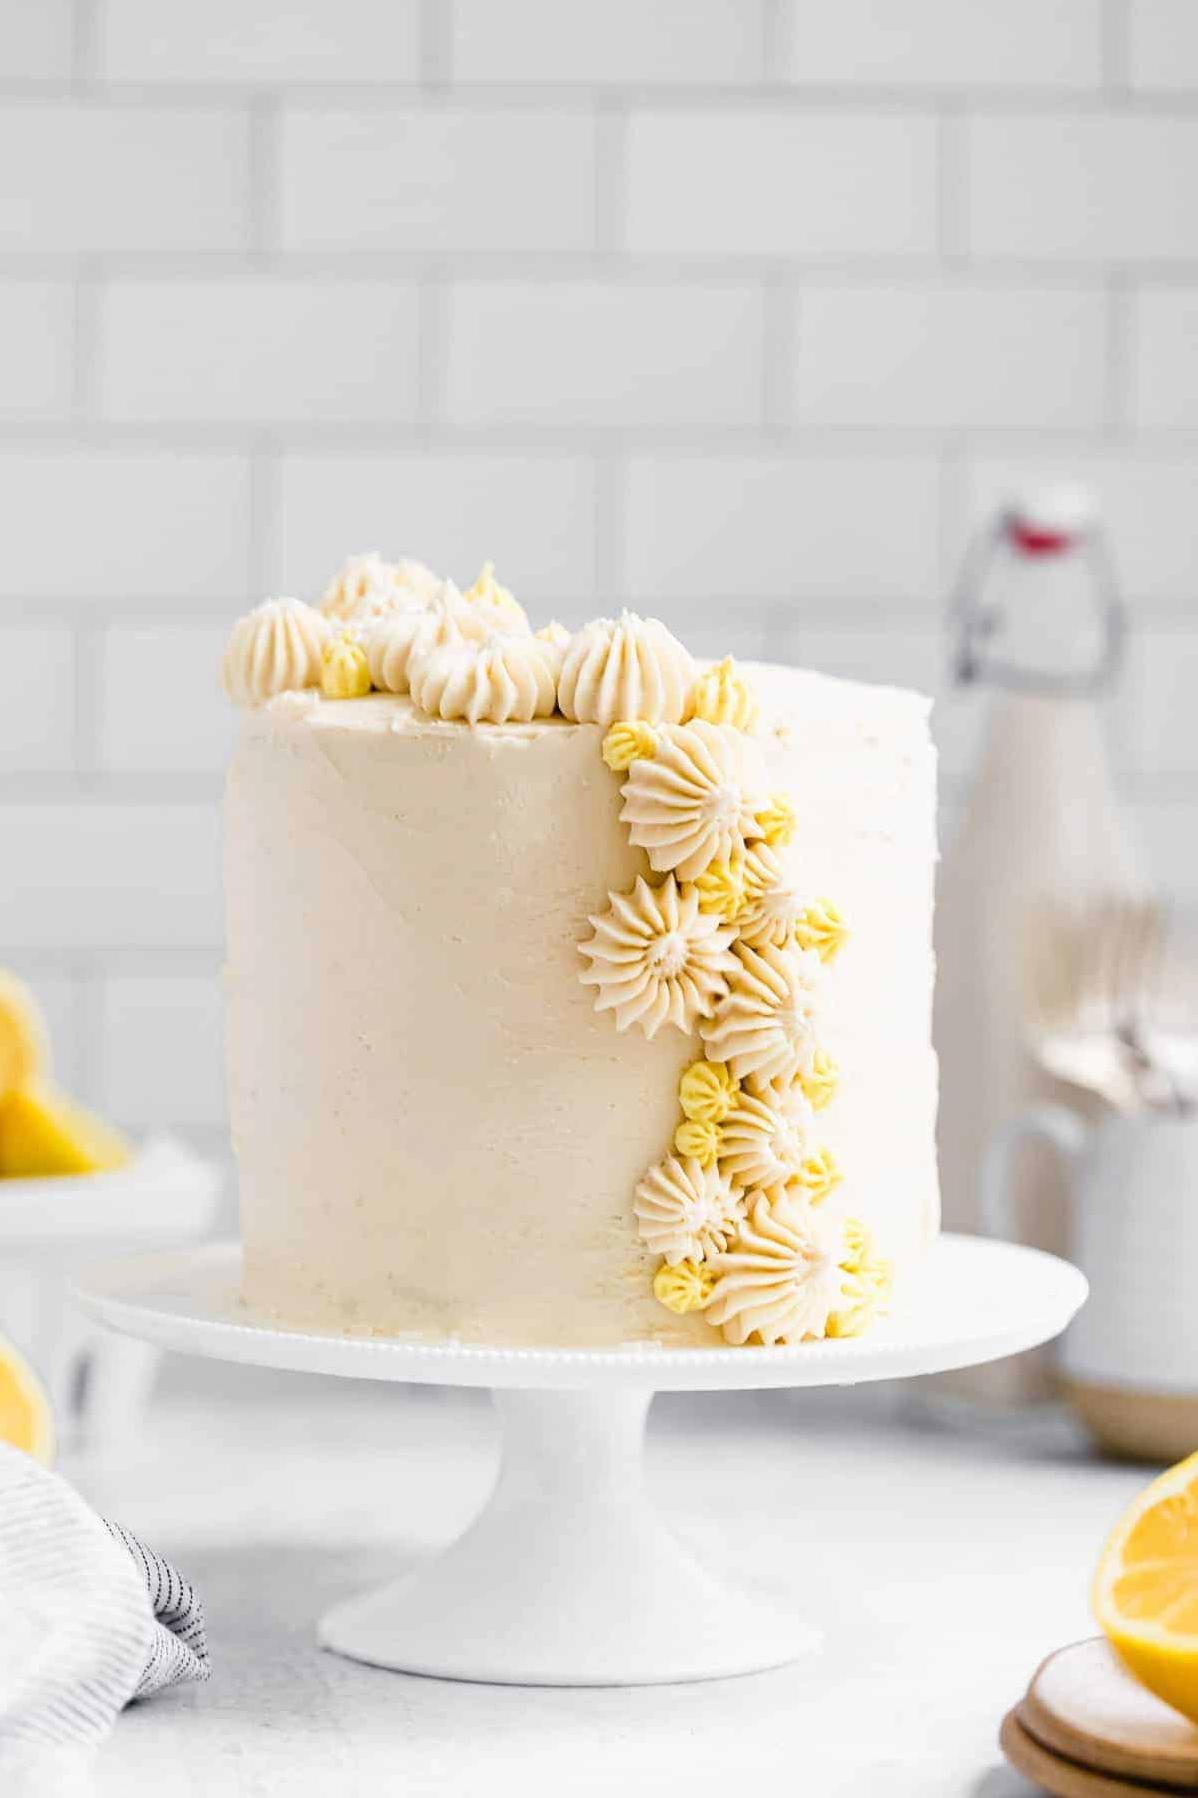  Who says gluten-free can't be delicious? This Lemon Layer Cake is sure to impress!